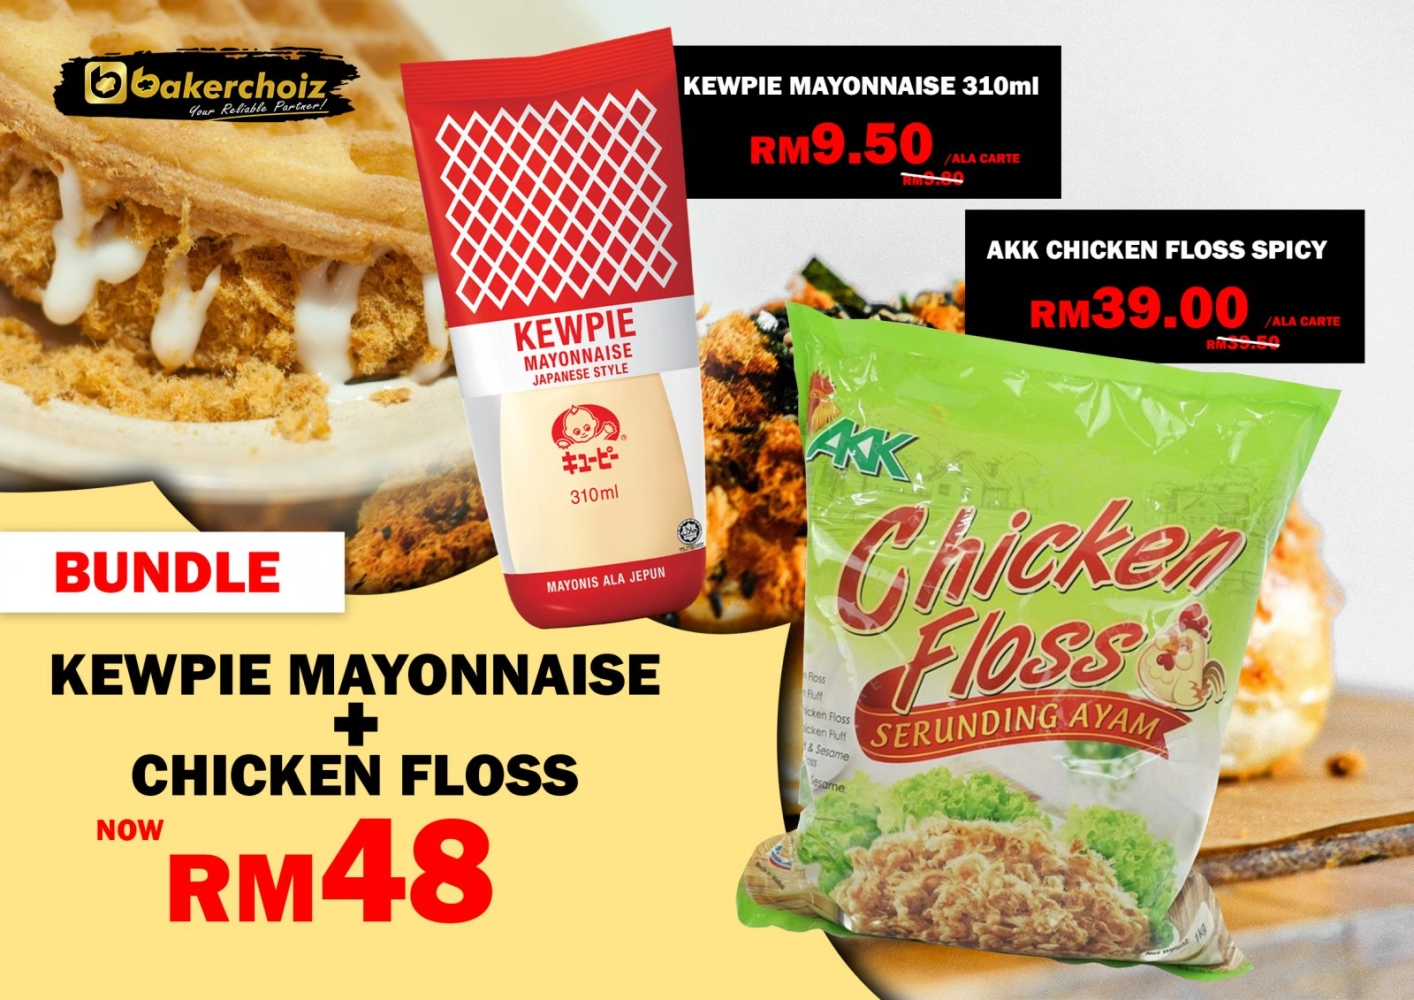 KEWPIE MAYONNAISE AND SPICY CHICKEN FLOSS BUNDLE SET